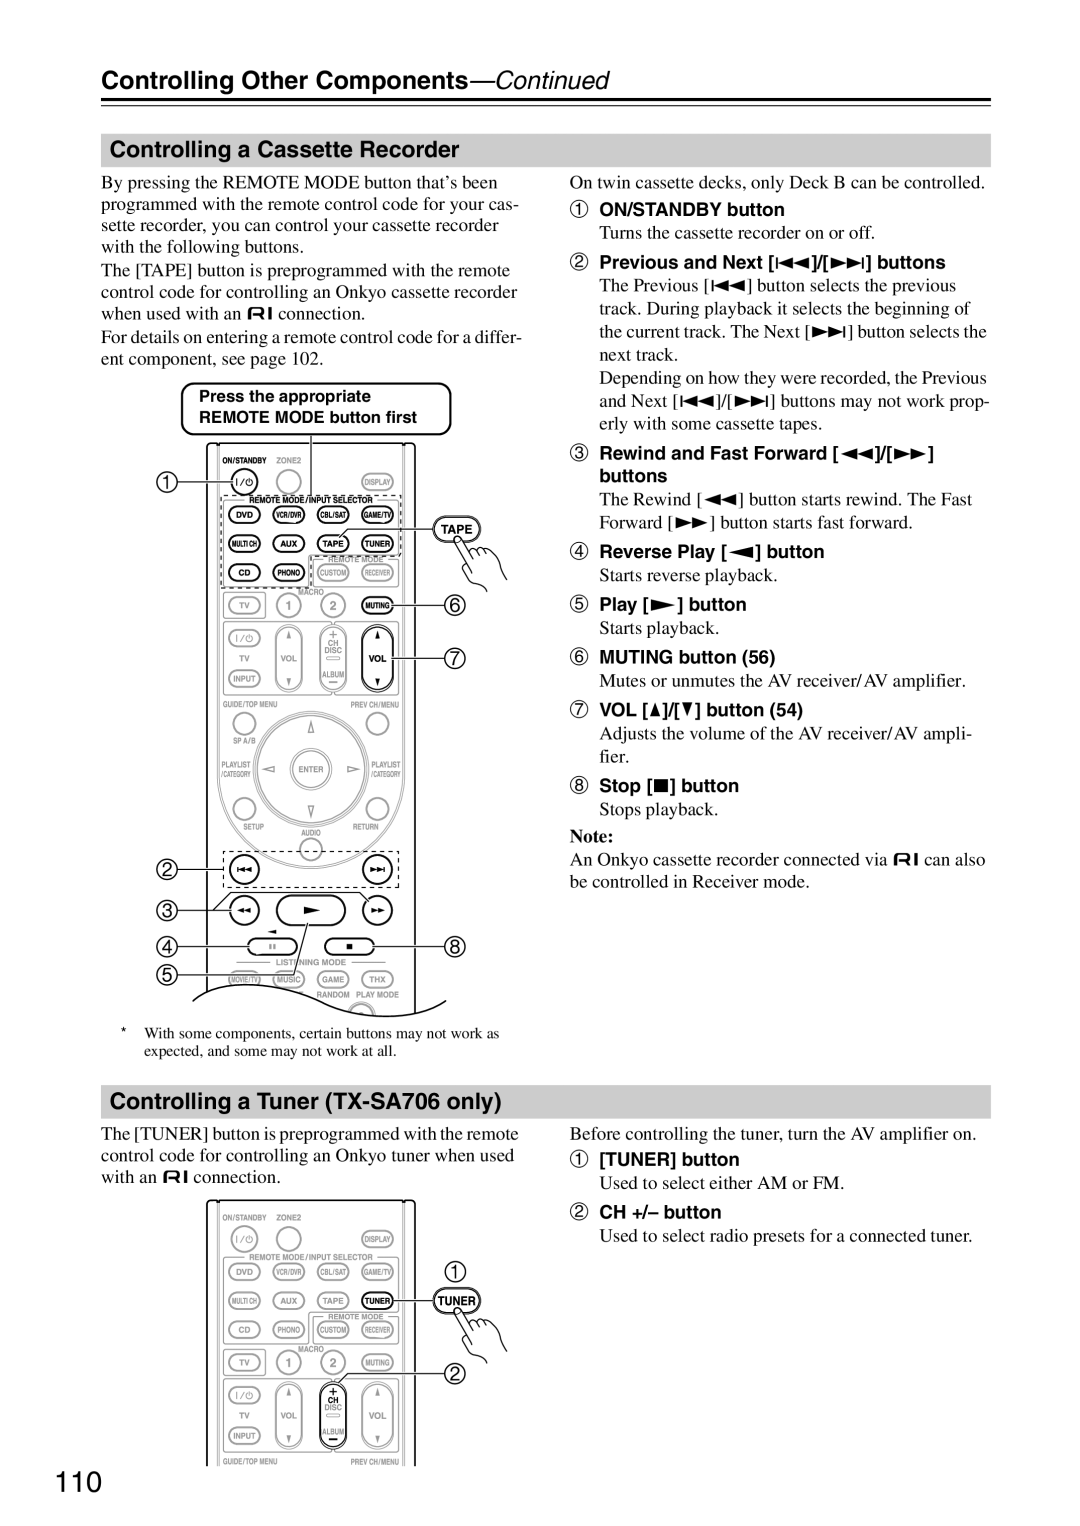 Onkyo instruction manual Controlling a Cassette Recorder, Controlling a Tuner TX-SA706only, 1 6 7, 48 5 